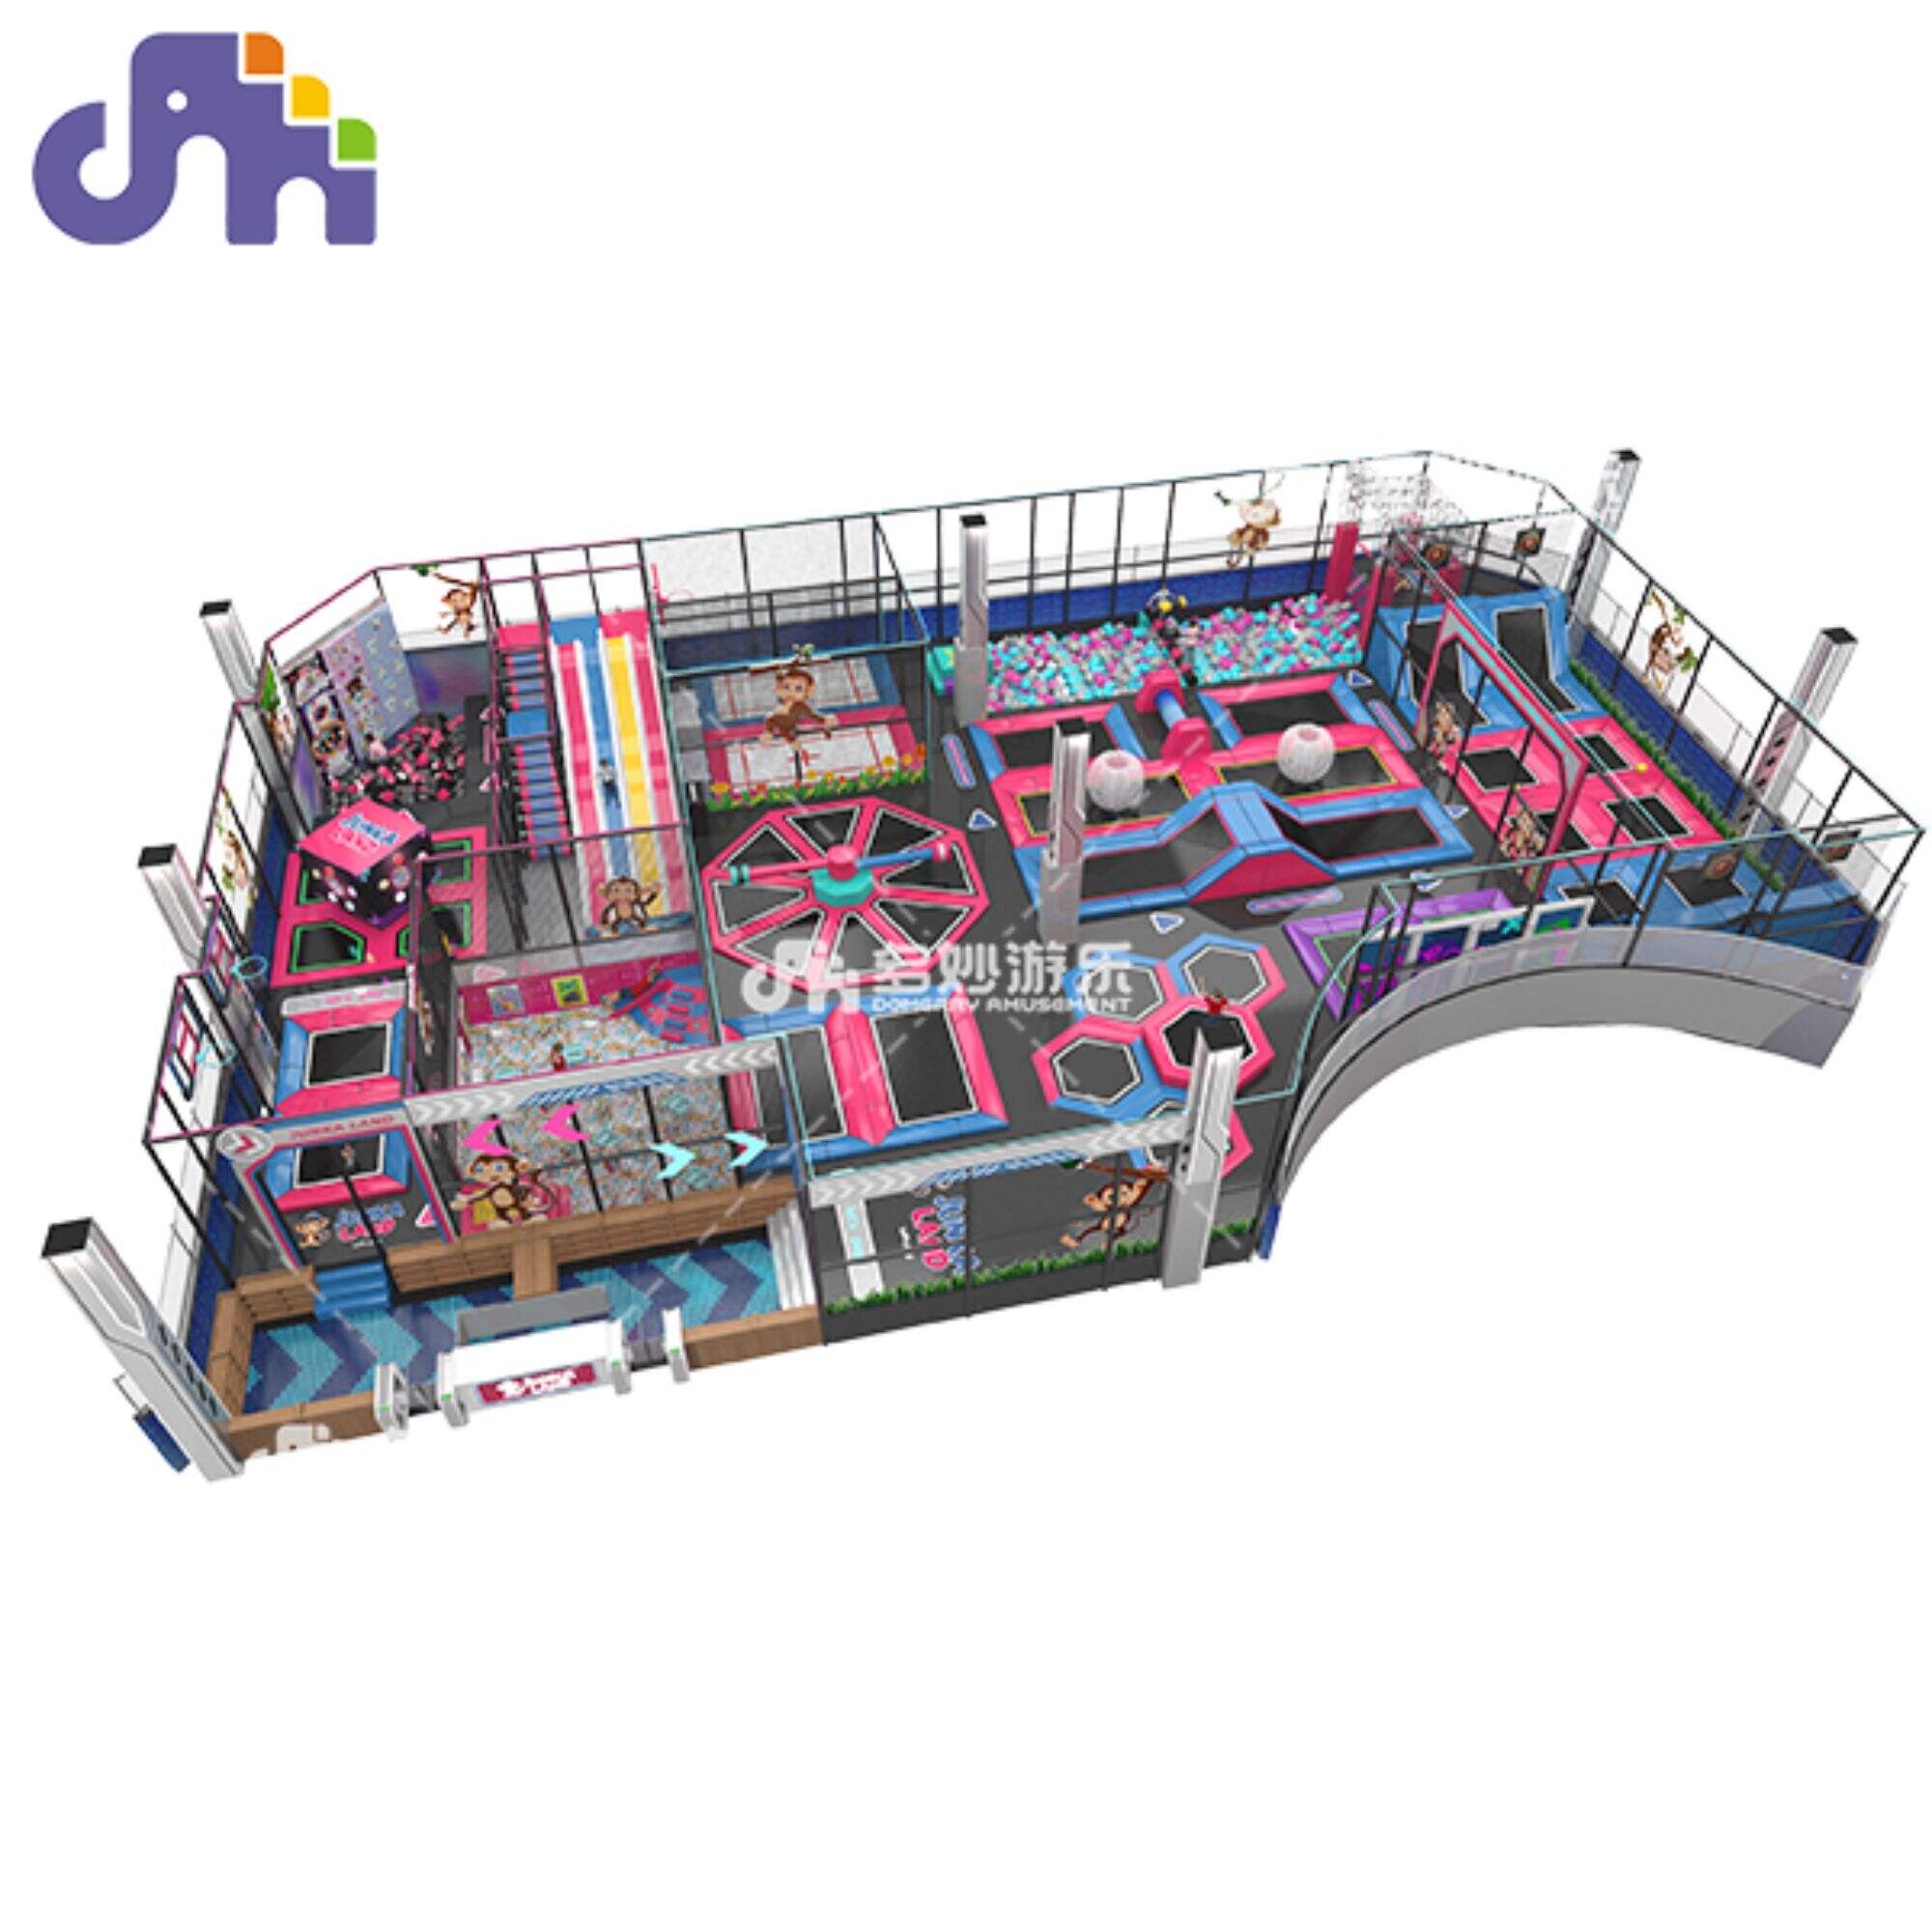 Kids Trampoline Park Manufactured by Adult Jumping Trampoline Available for Shopping Malls